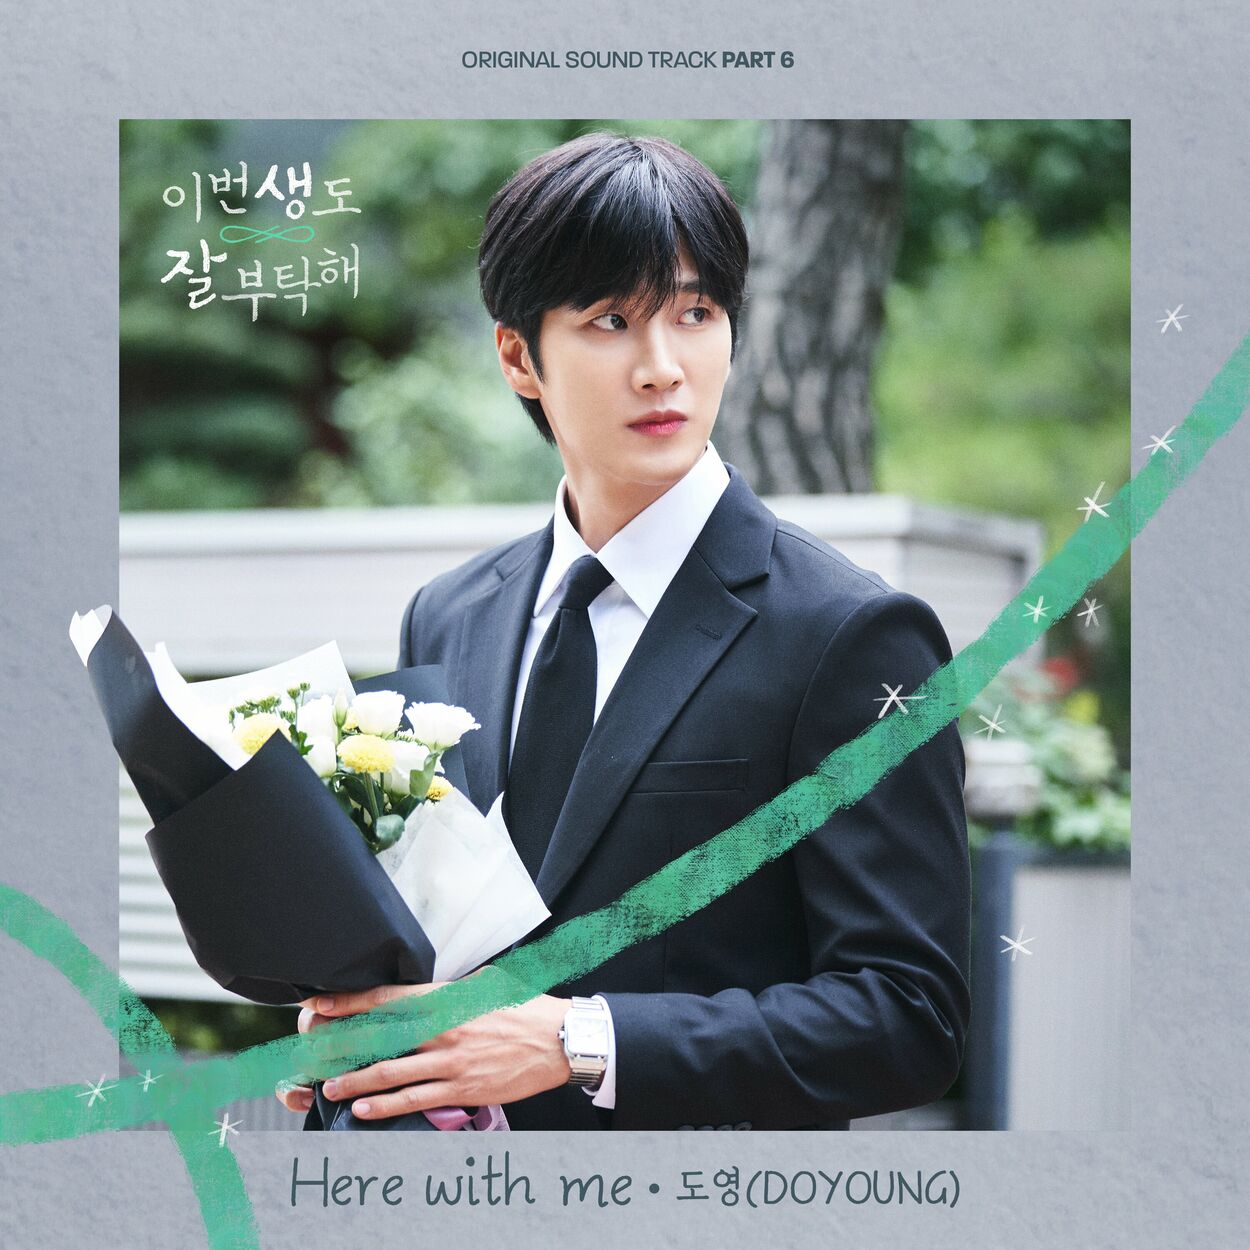 DOYOUNG – See You in My 19th Life, Pt. 6 OST